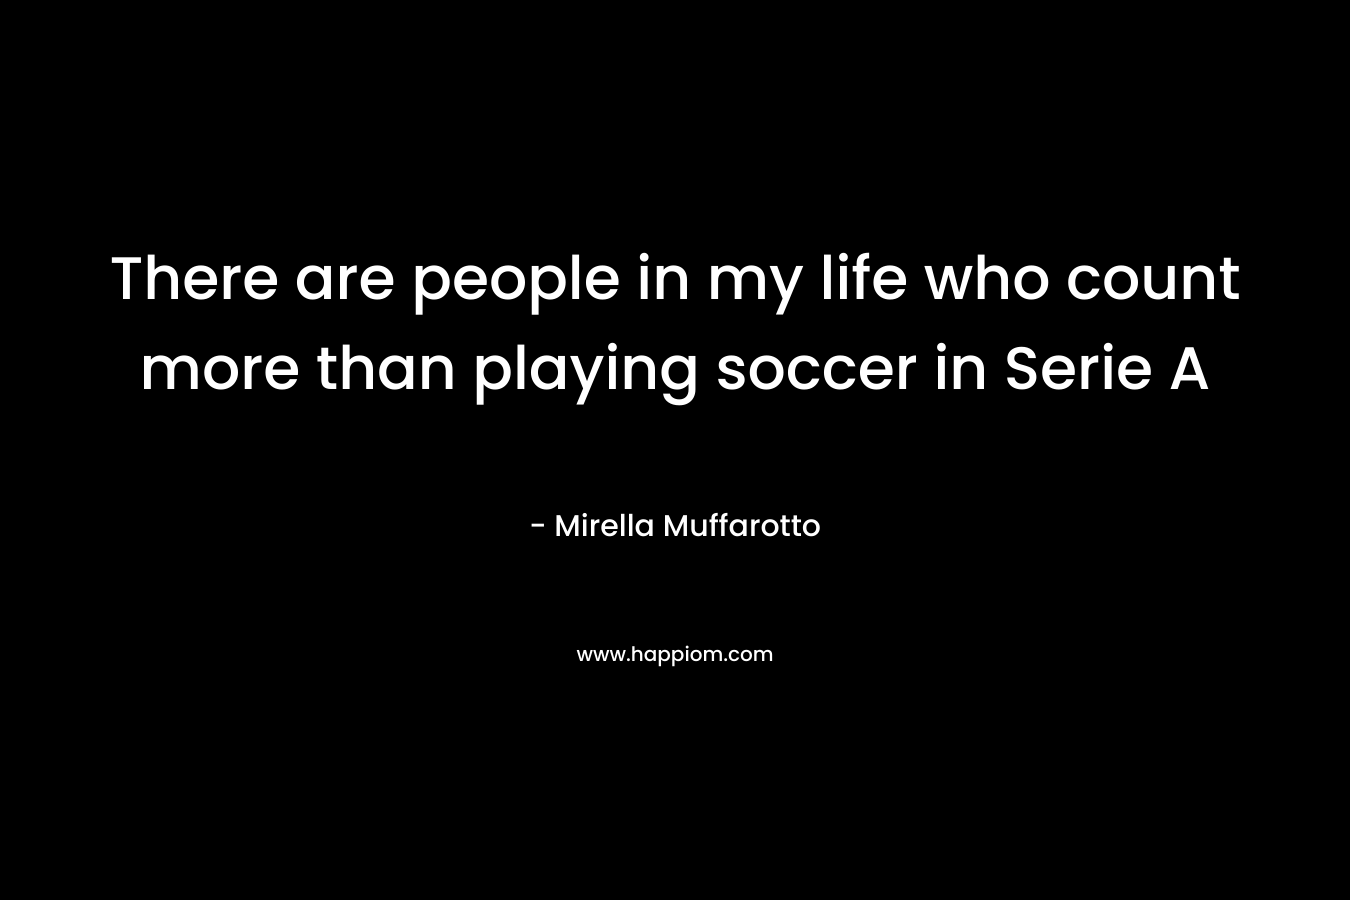 There are people in my life who count more than playing soccer in Serie A